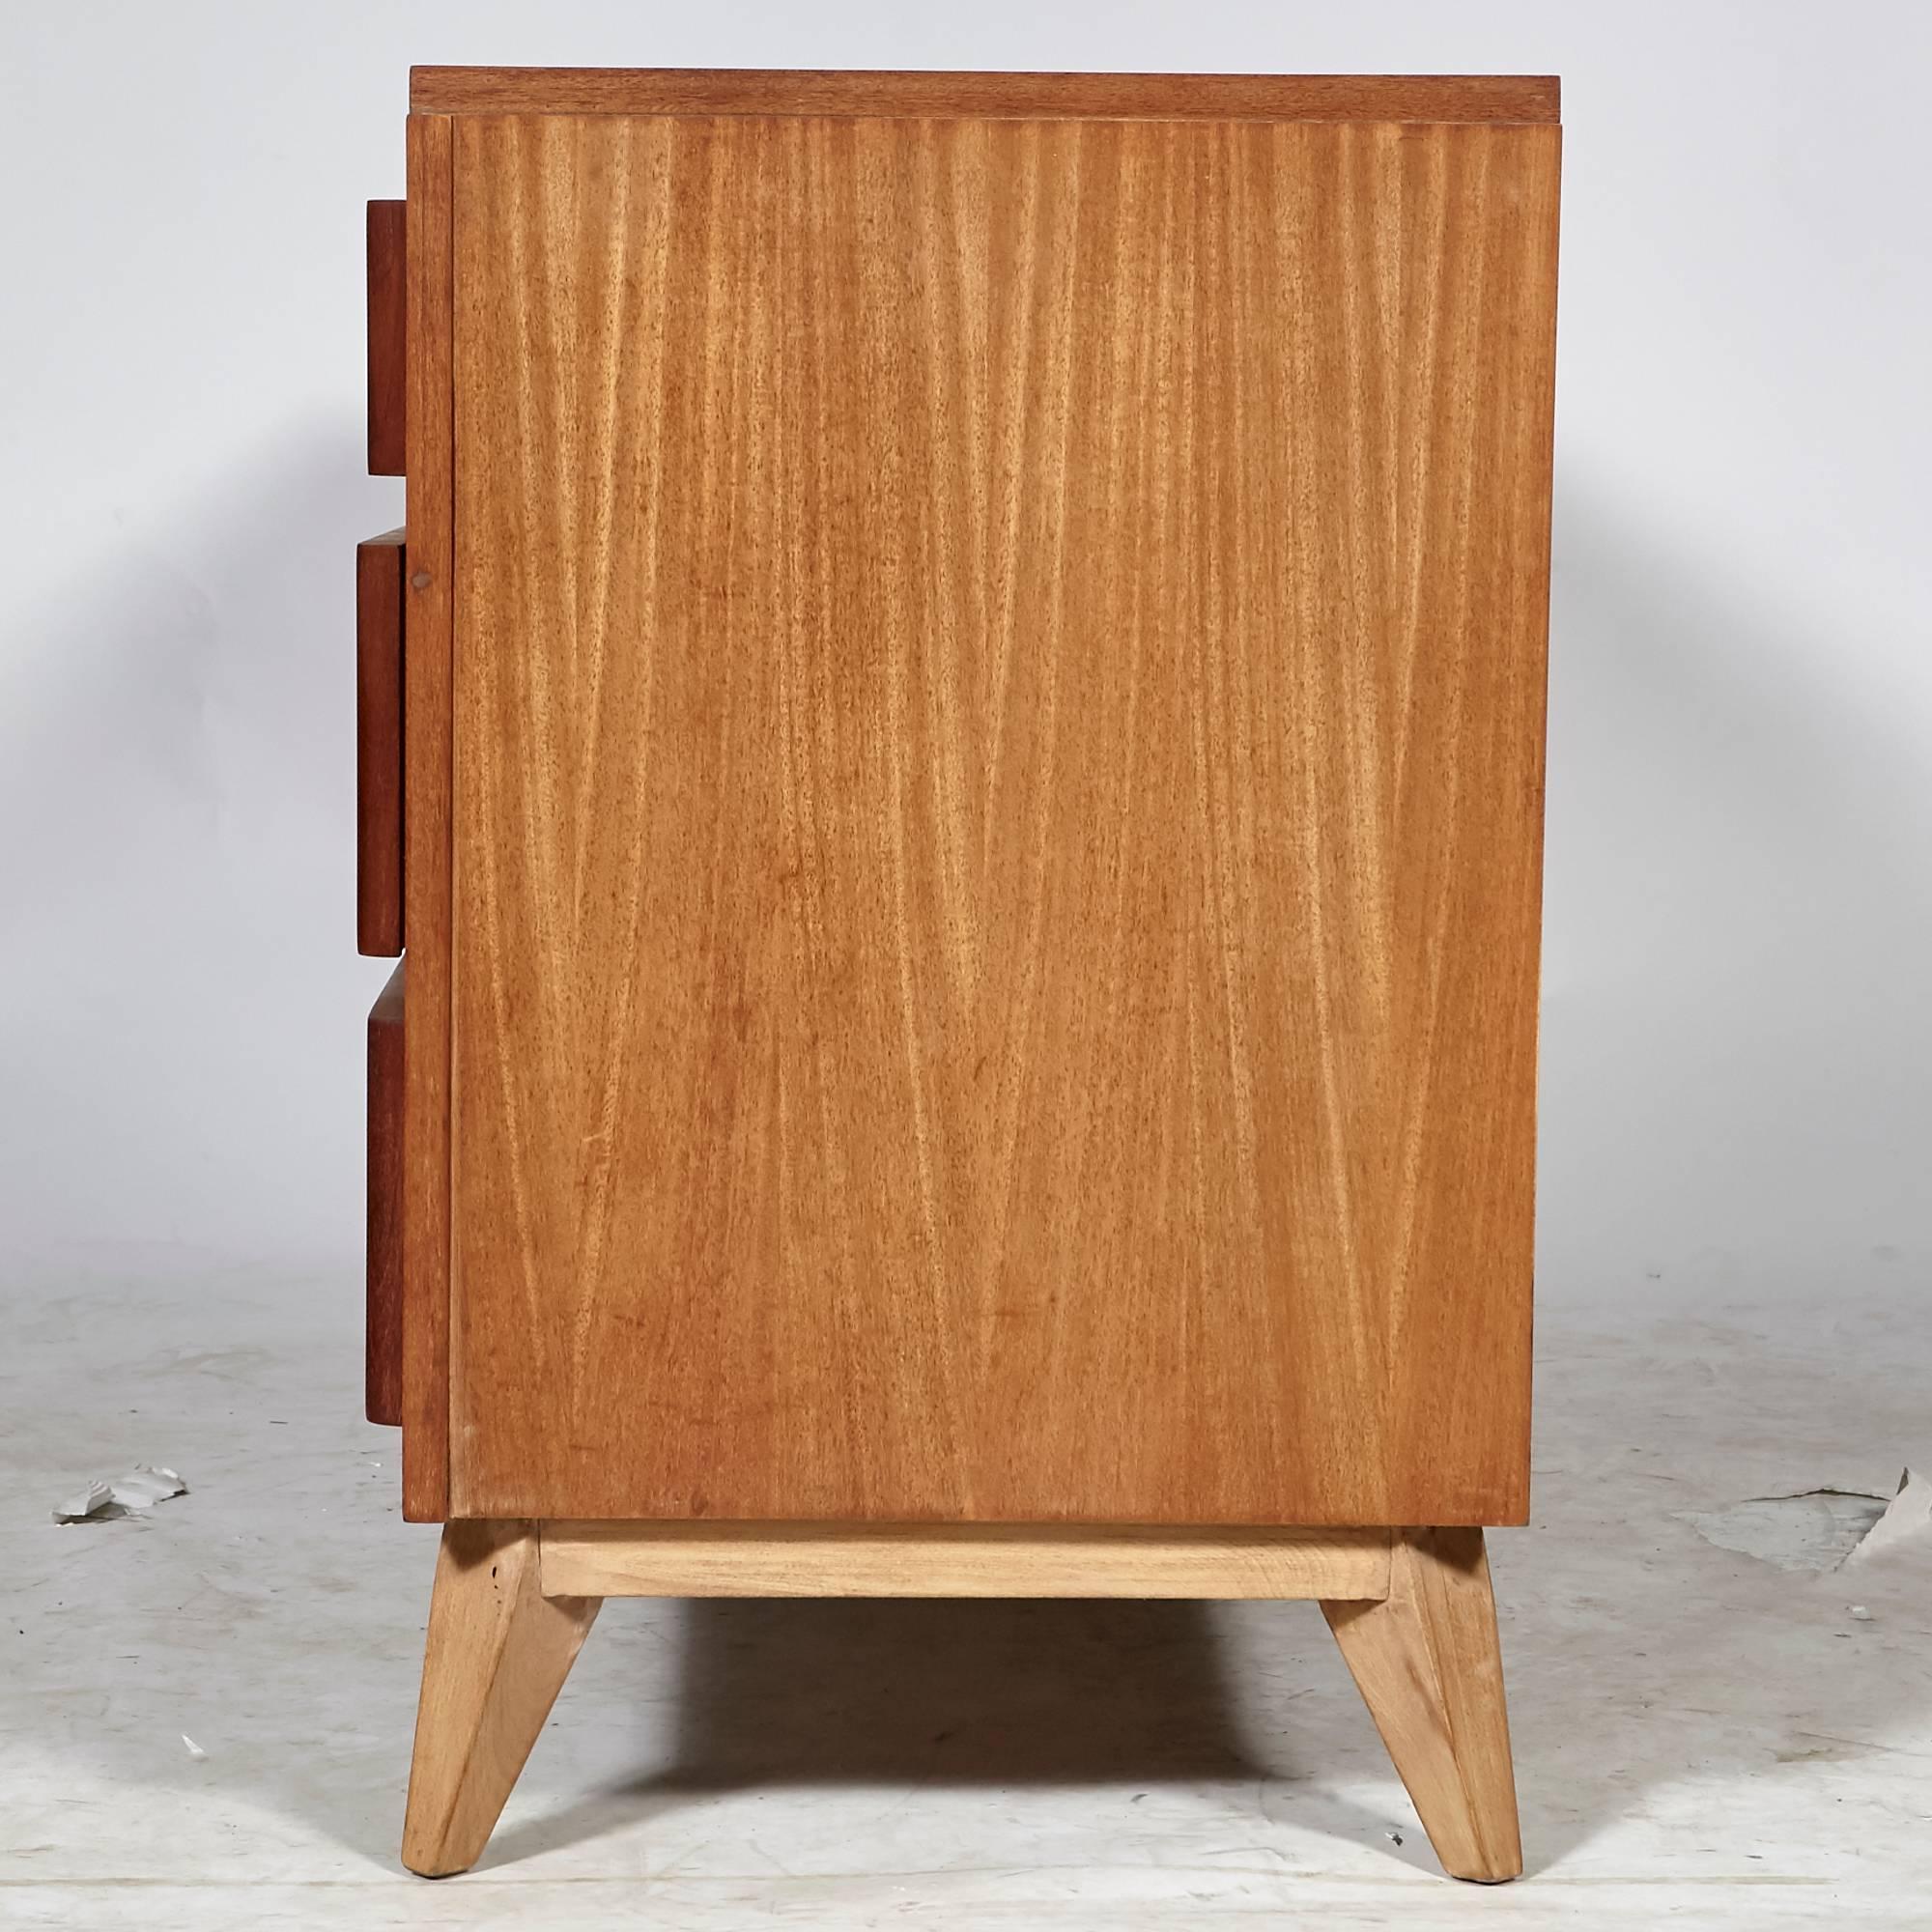 Mahogany Eliel Saarinen Low Chest of Drawers for Rway Furniture, 1940s For Sale